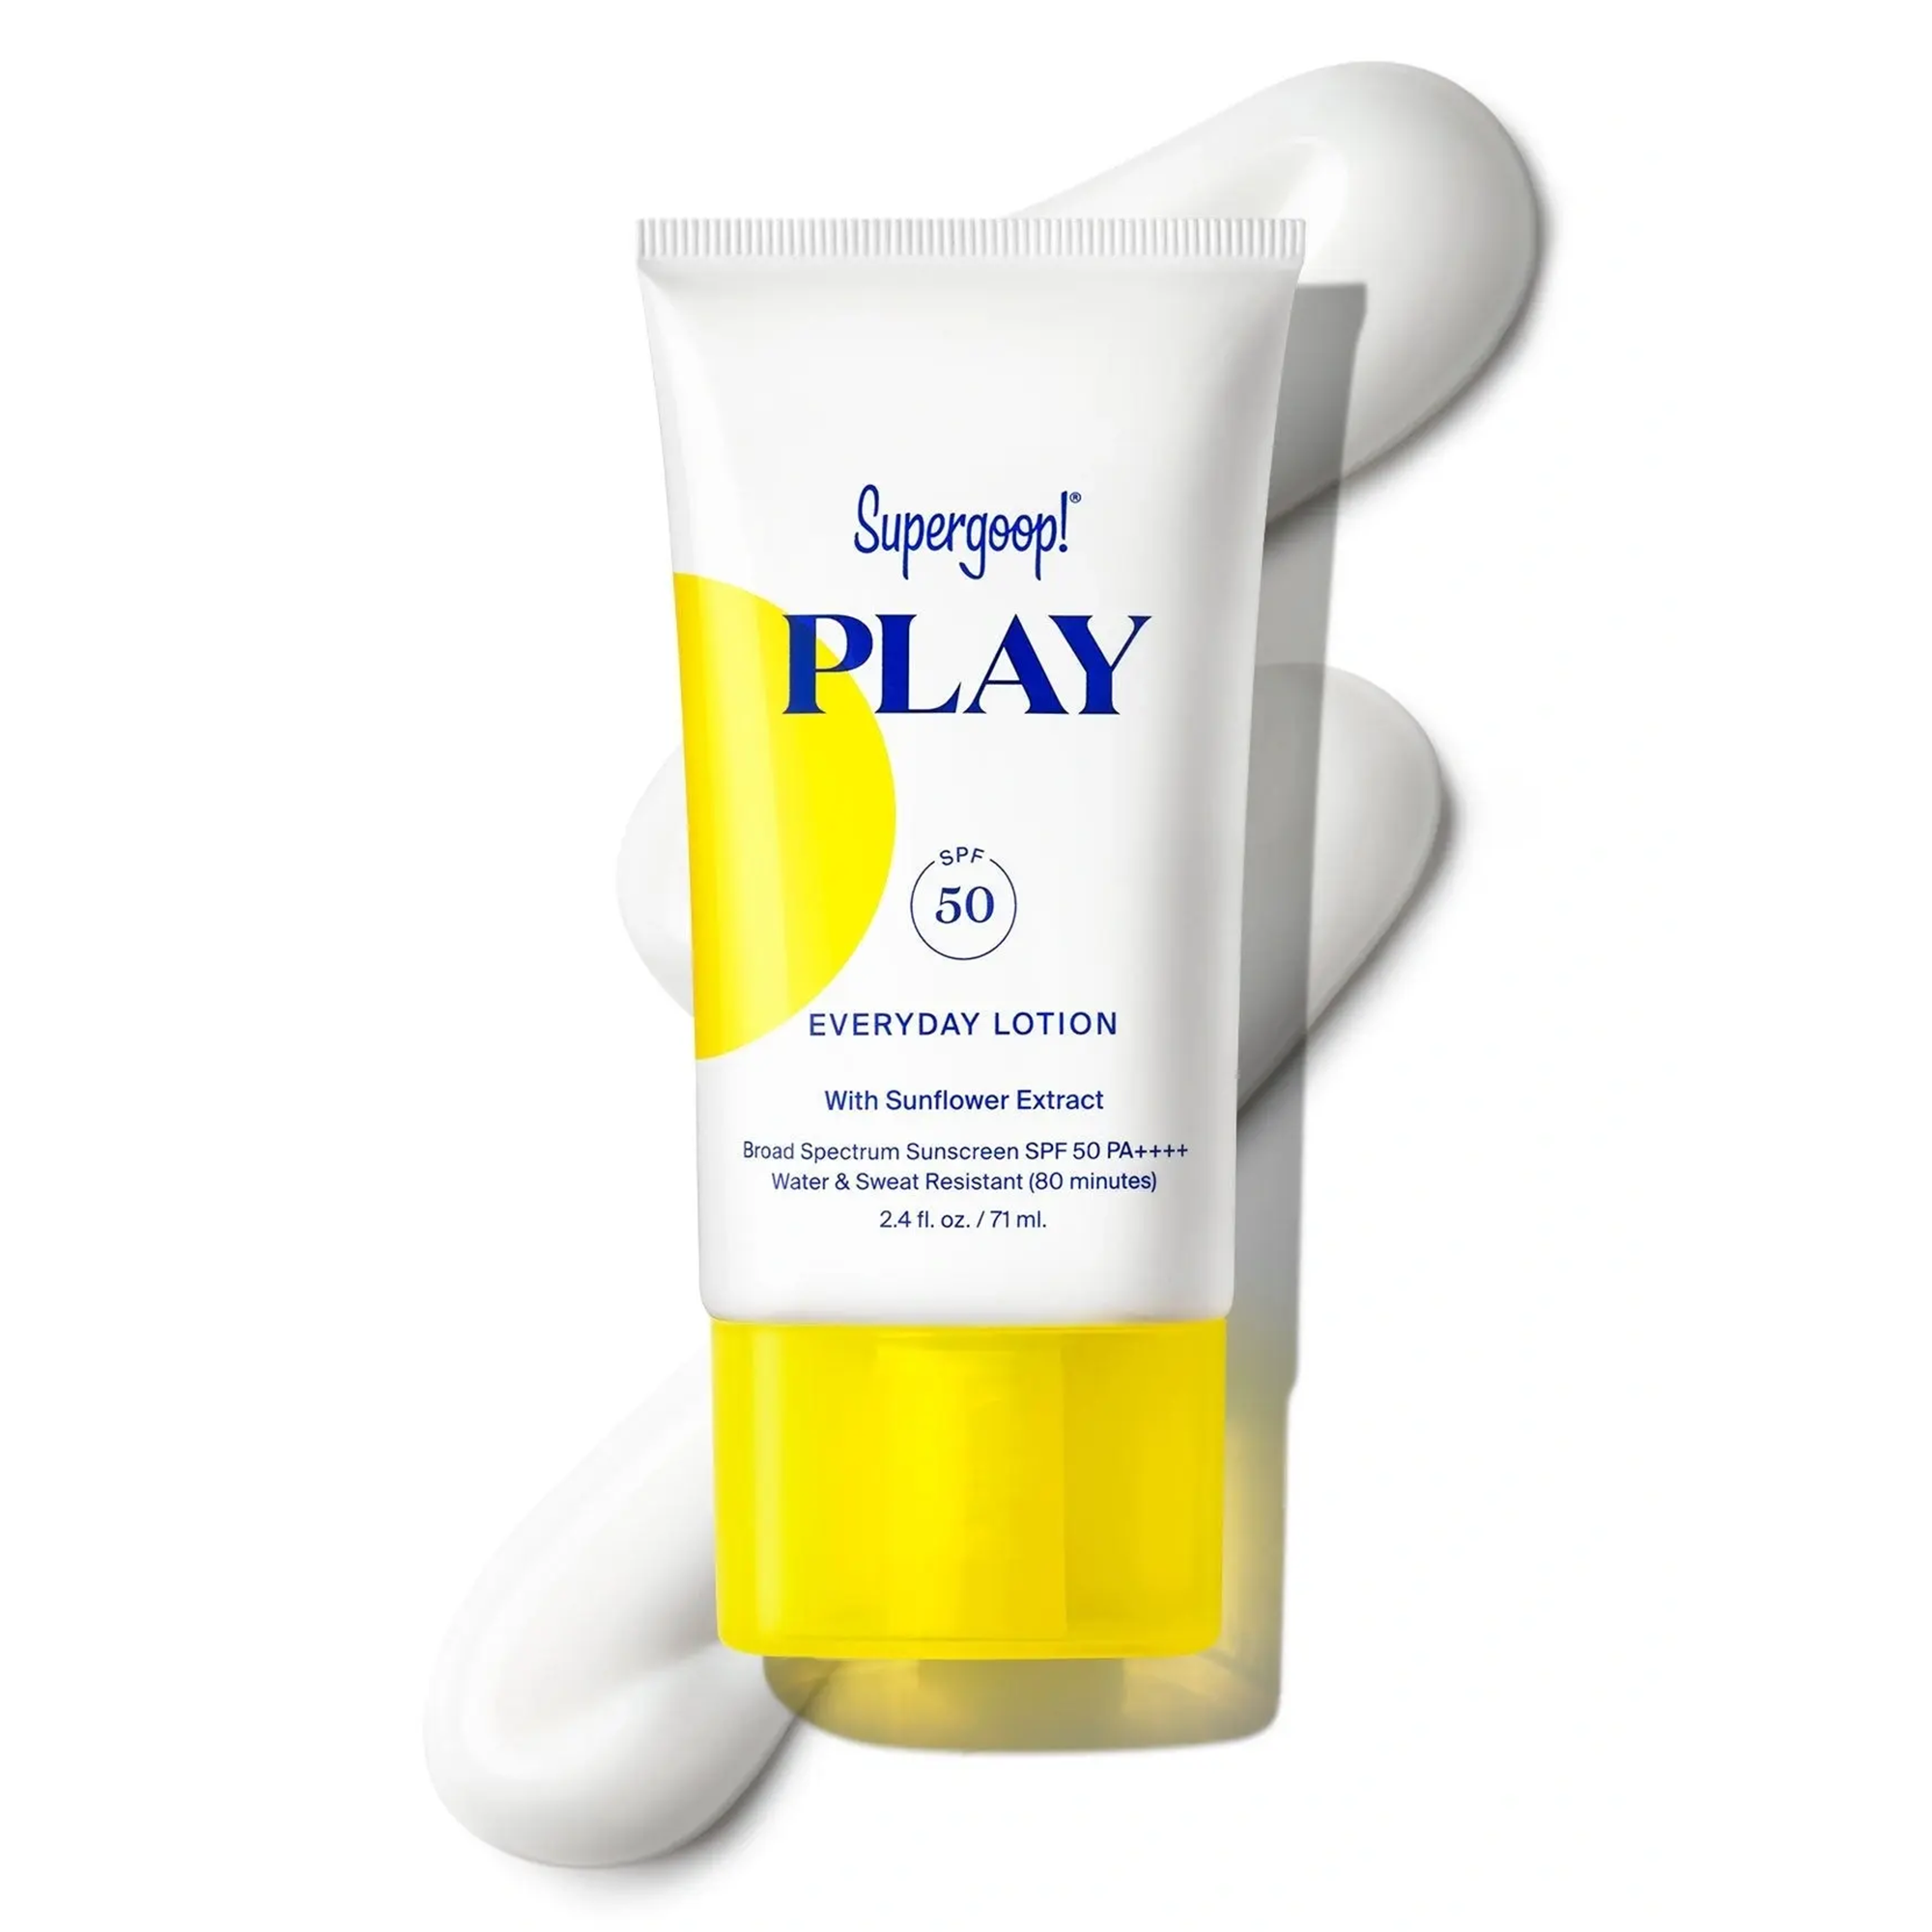 Supergoop! Play Everyday Lotion with Sunflower Extract Broad Spectrum Sunscreen - SPF 50 / 2.4OZ